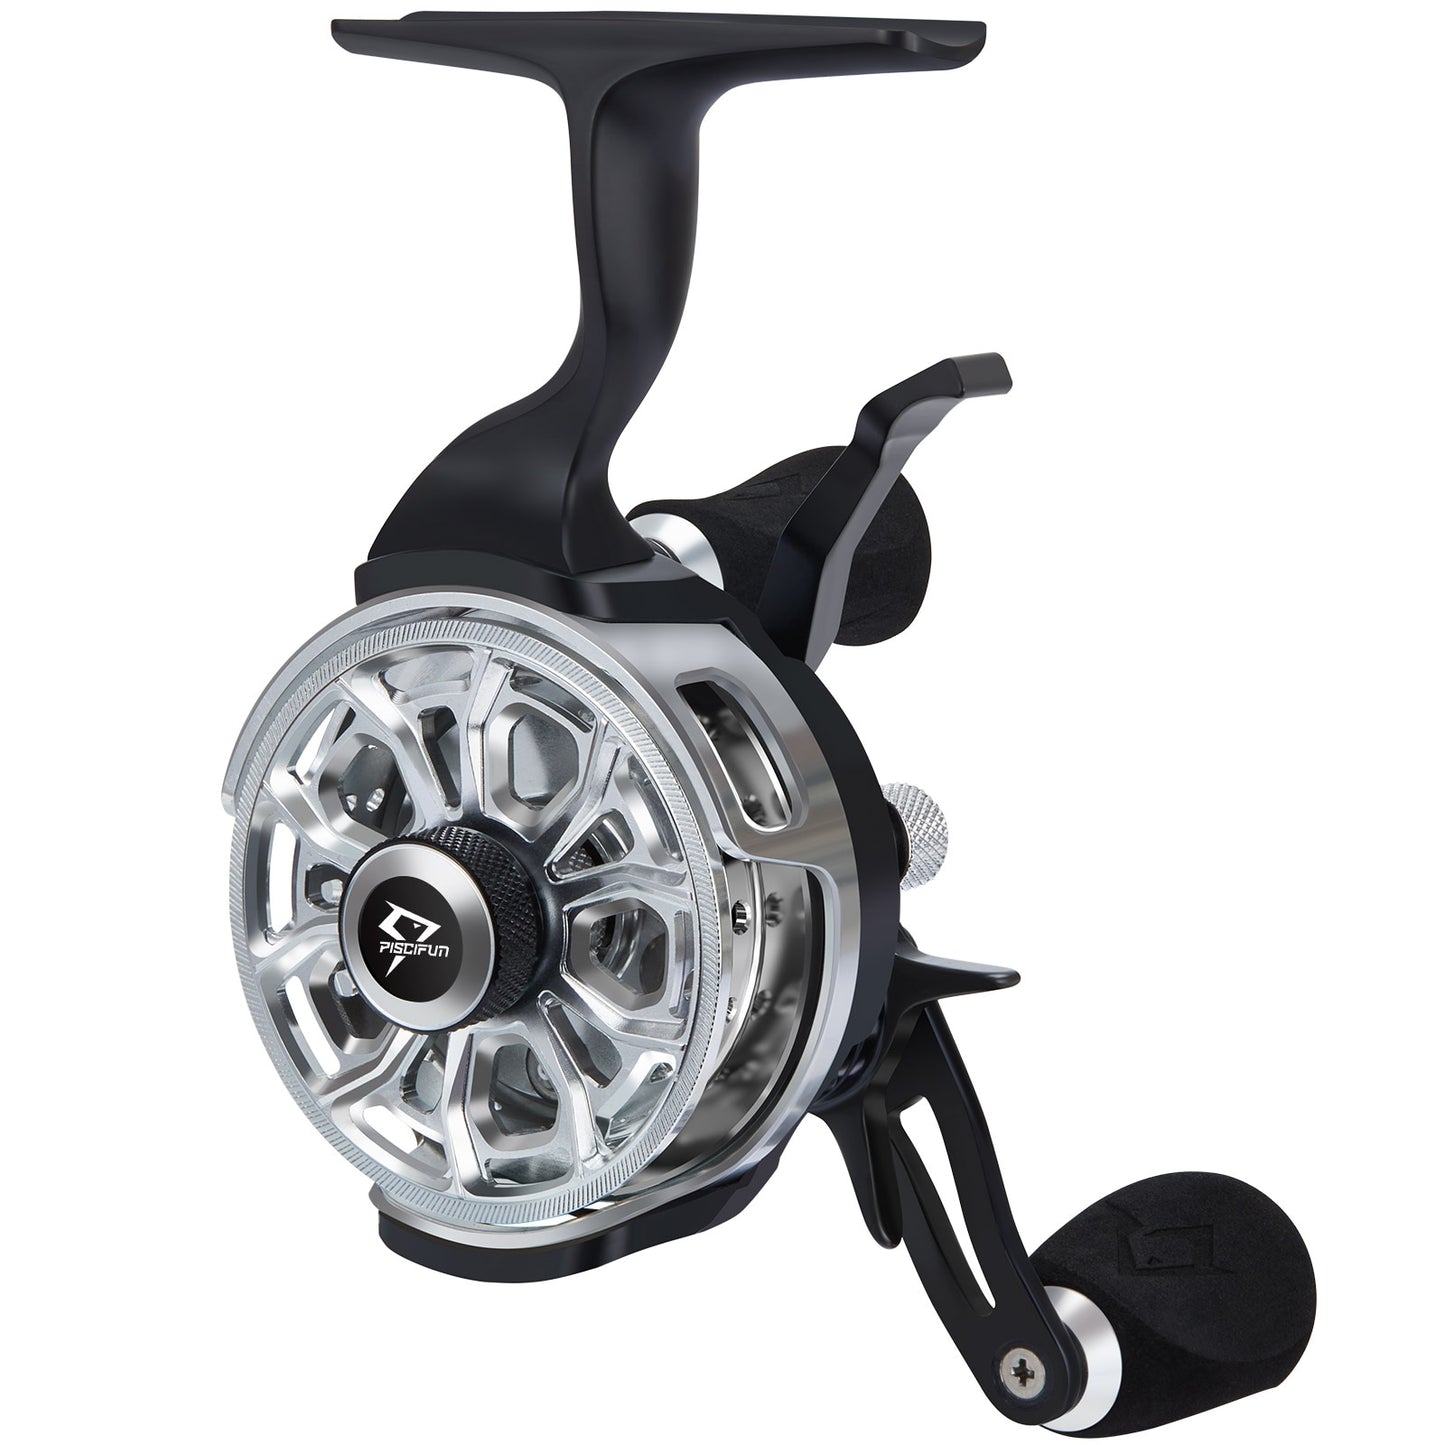 Piscifun ICX CARBON Ice Fishing Reels 3.2:1 High Speed Free Fall Dual-mode Trigger 8+1 Shielded BB Smooth Magnetic Winter Reel